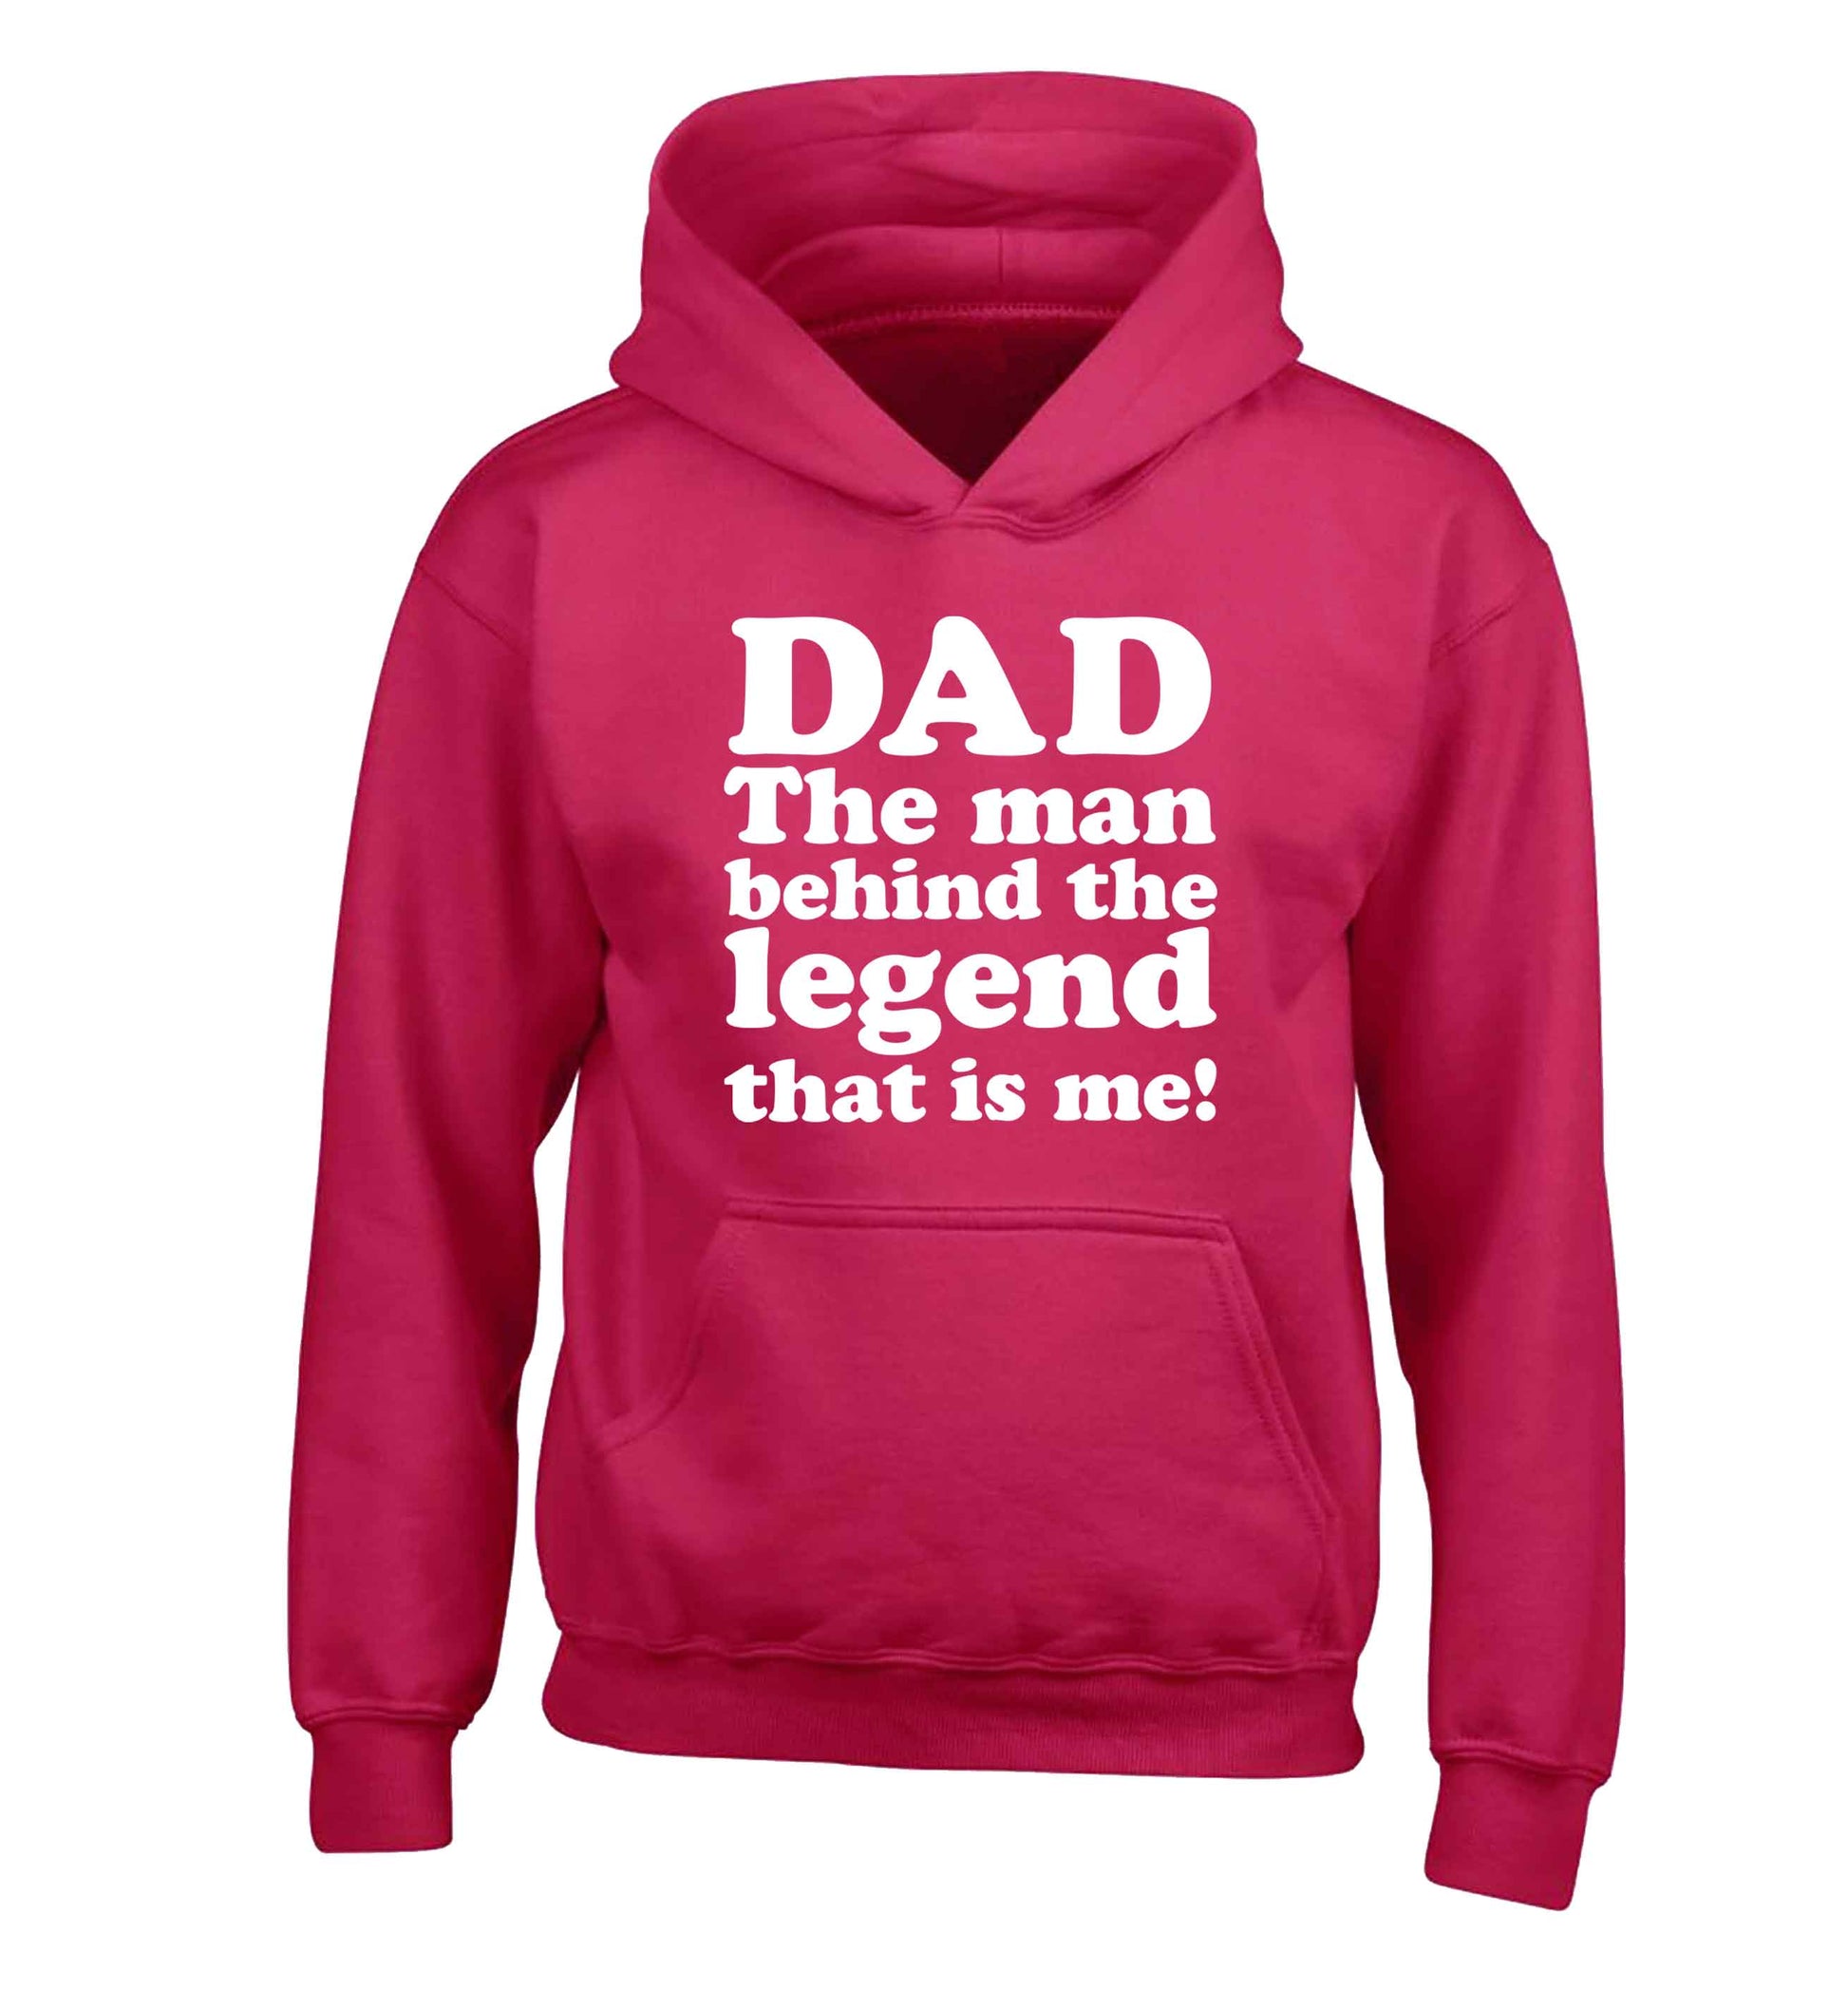 Dad the man behind the legend that is me children's pink hoodie 12-13 Years